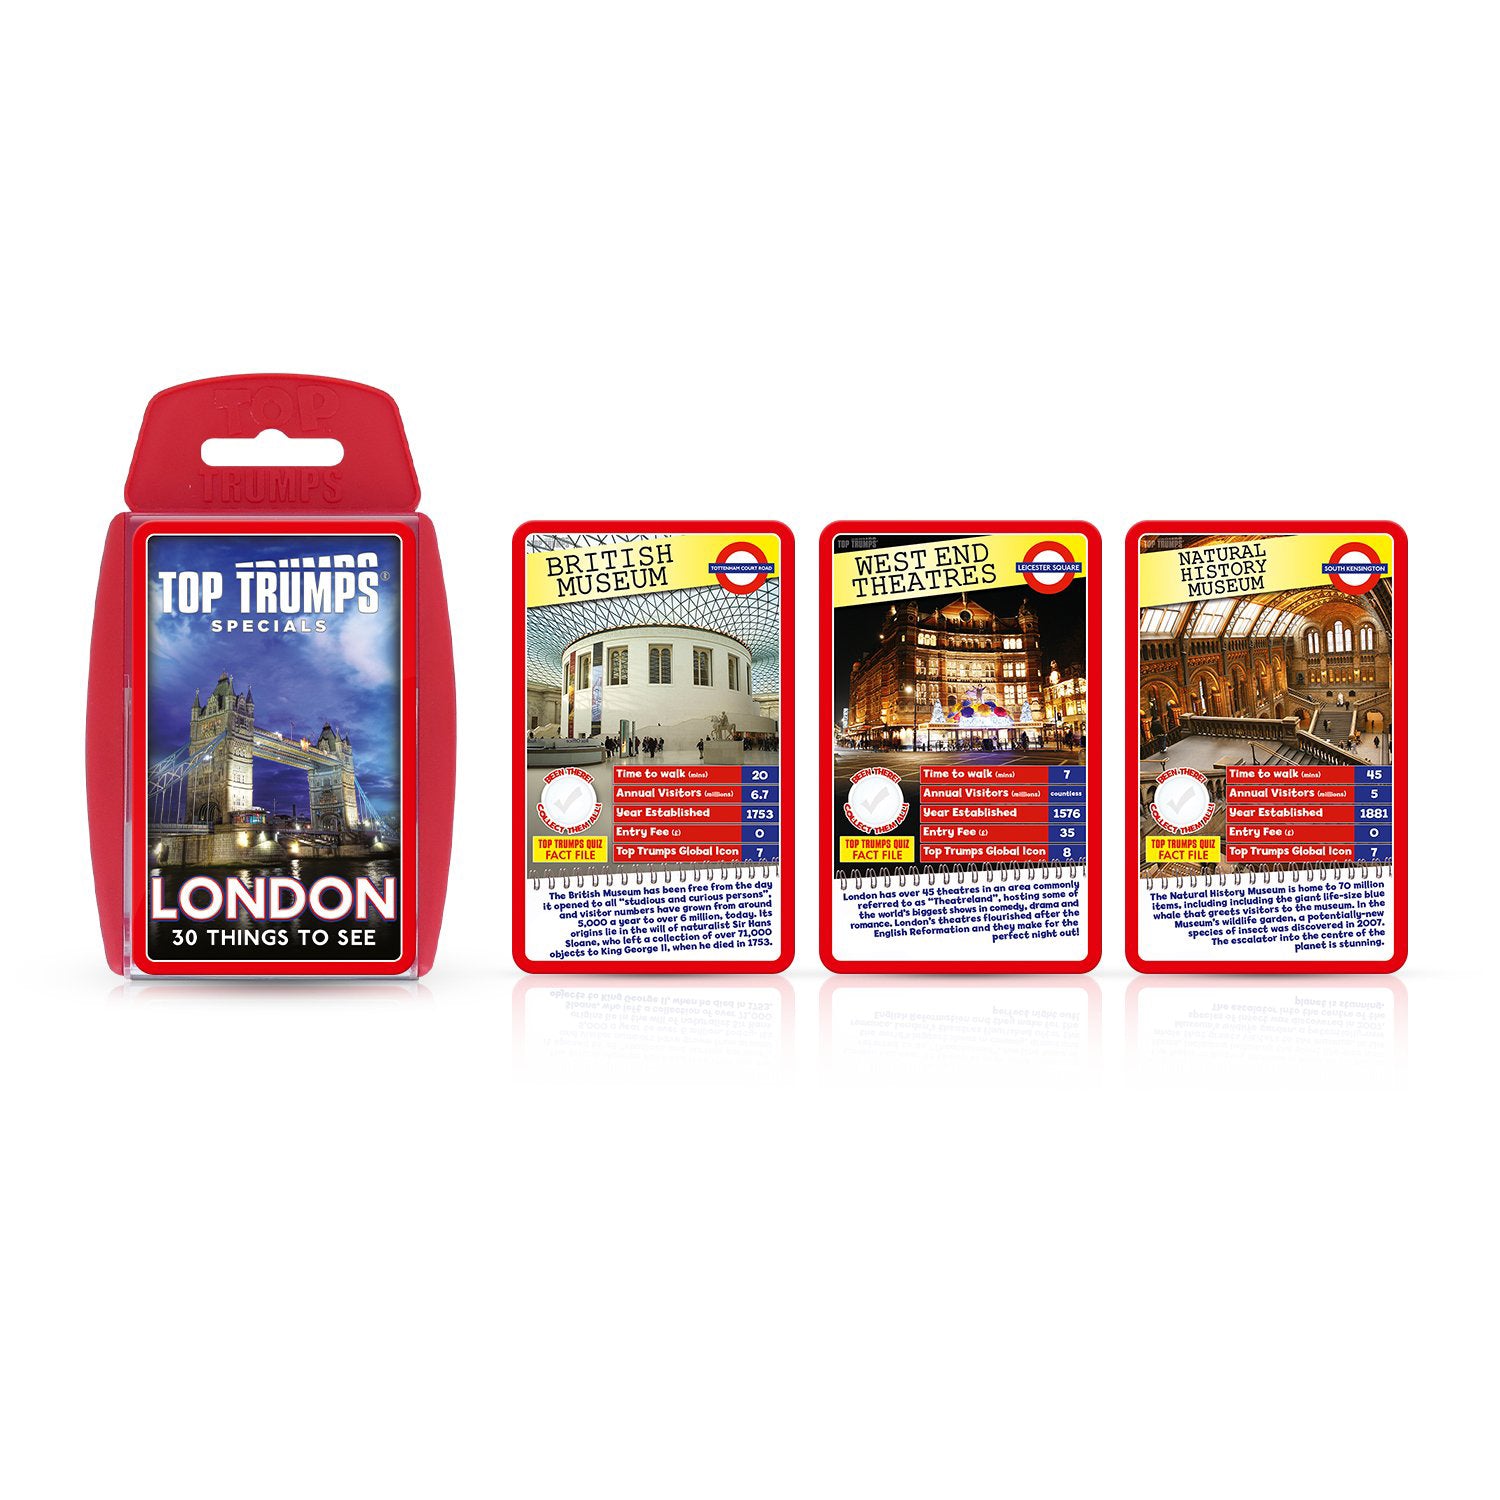 Top Trumps Special London 30 Things To See 2